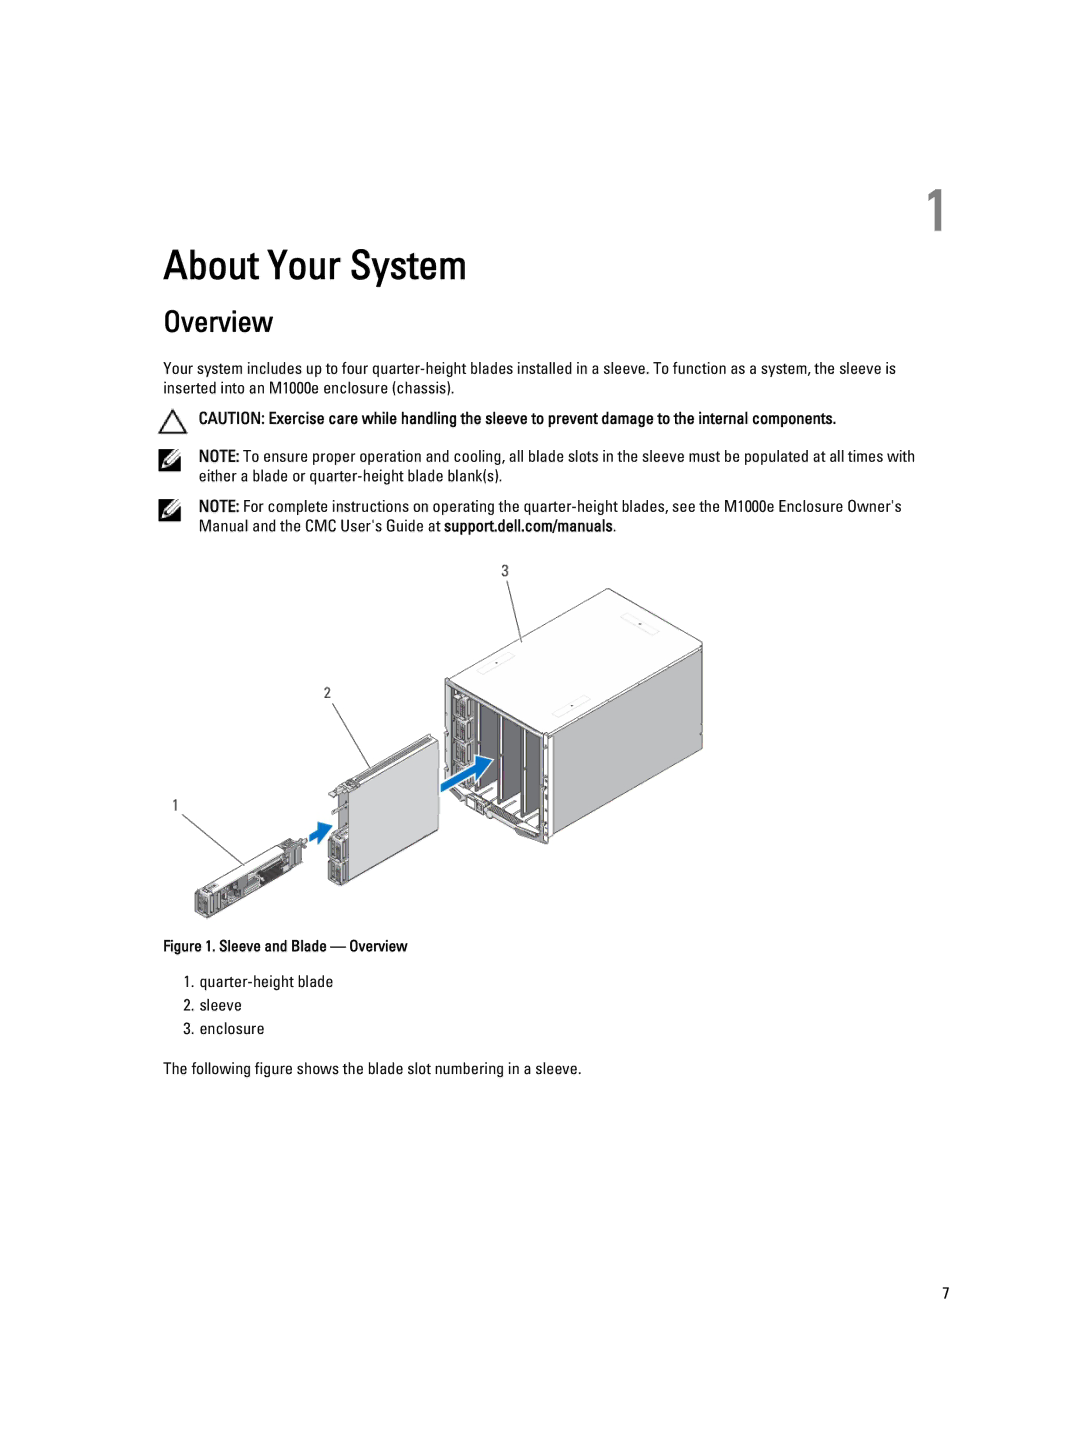 Dell QHB owner manual About Your System, Overview 